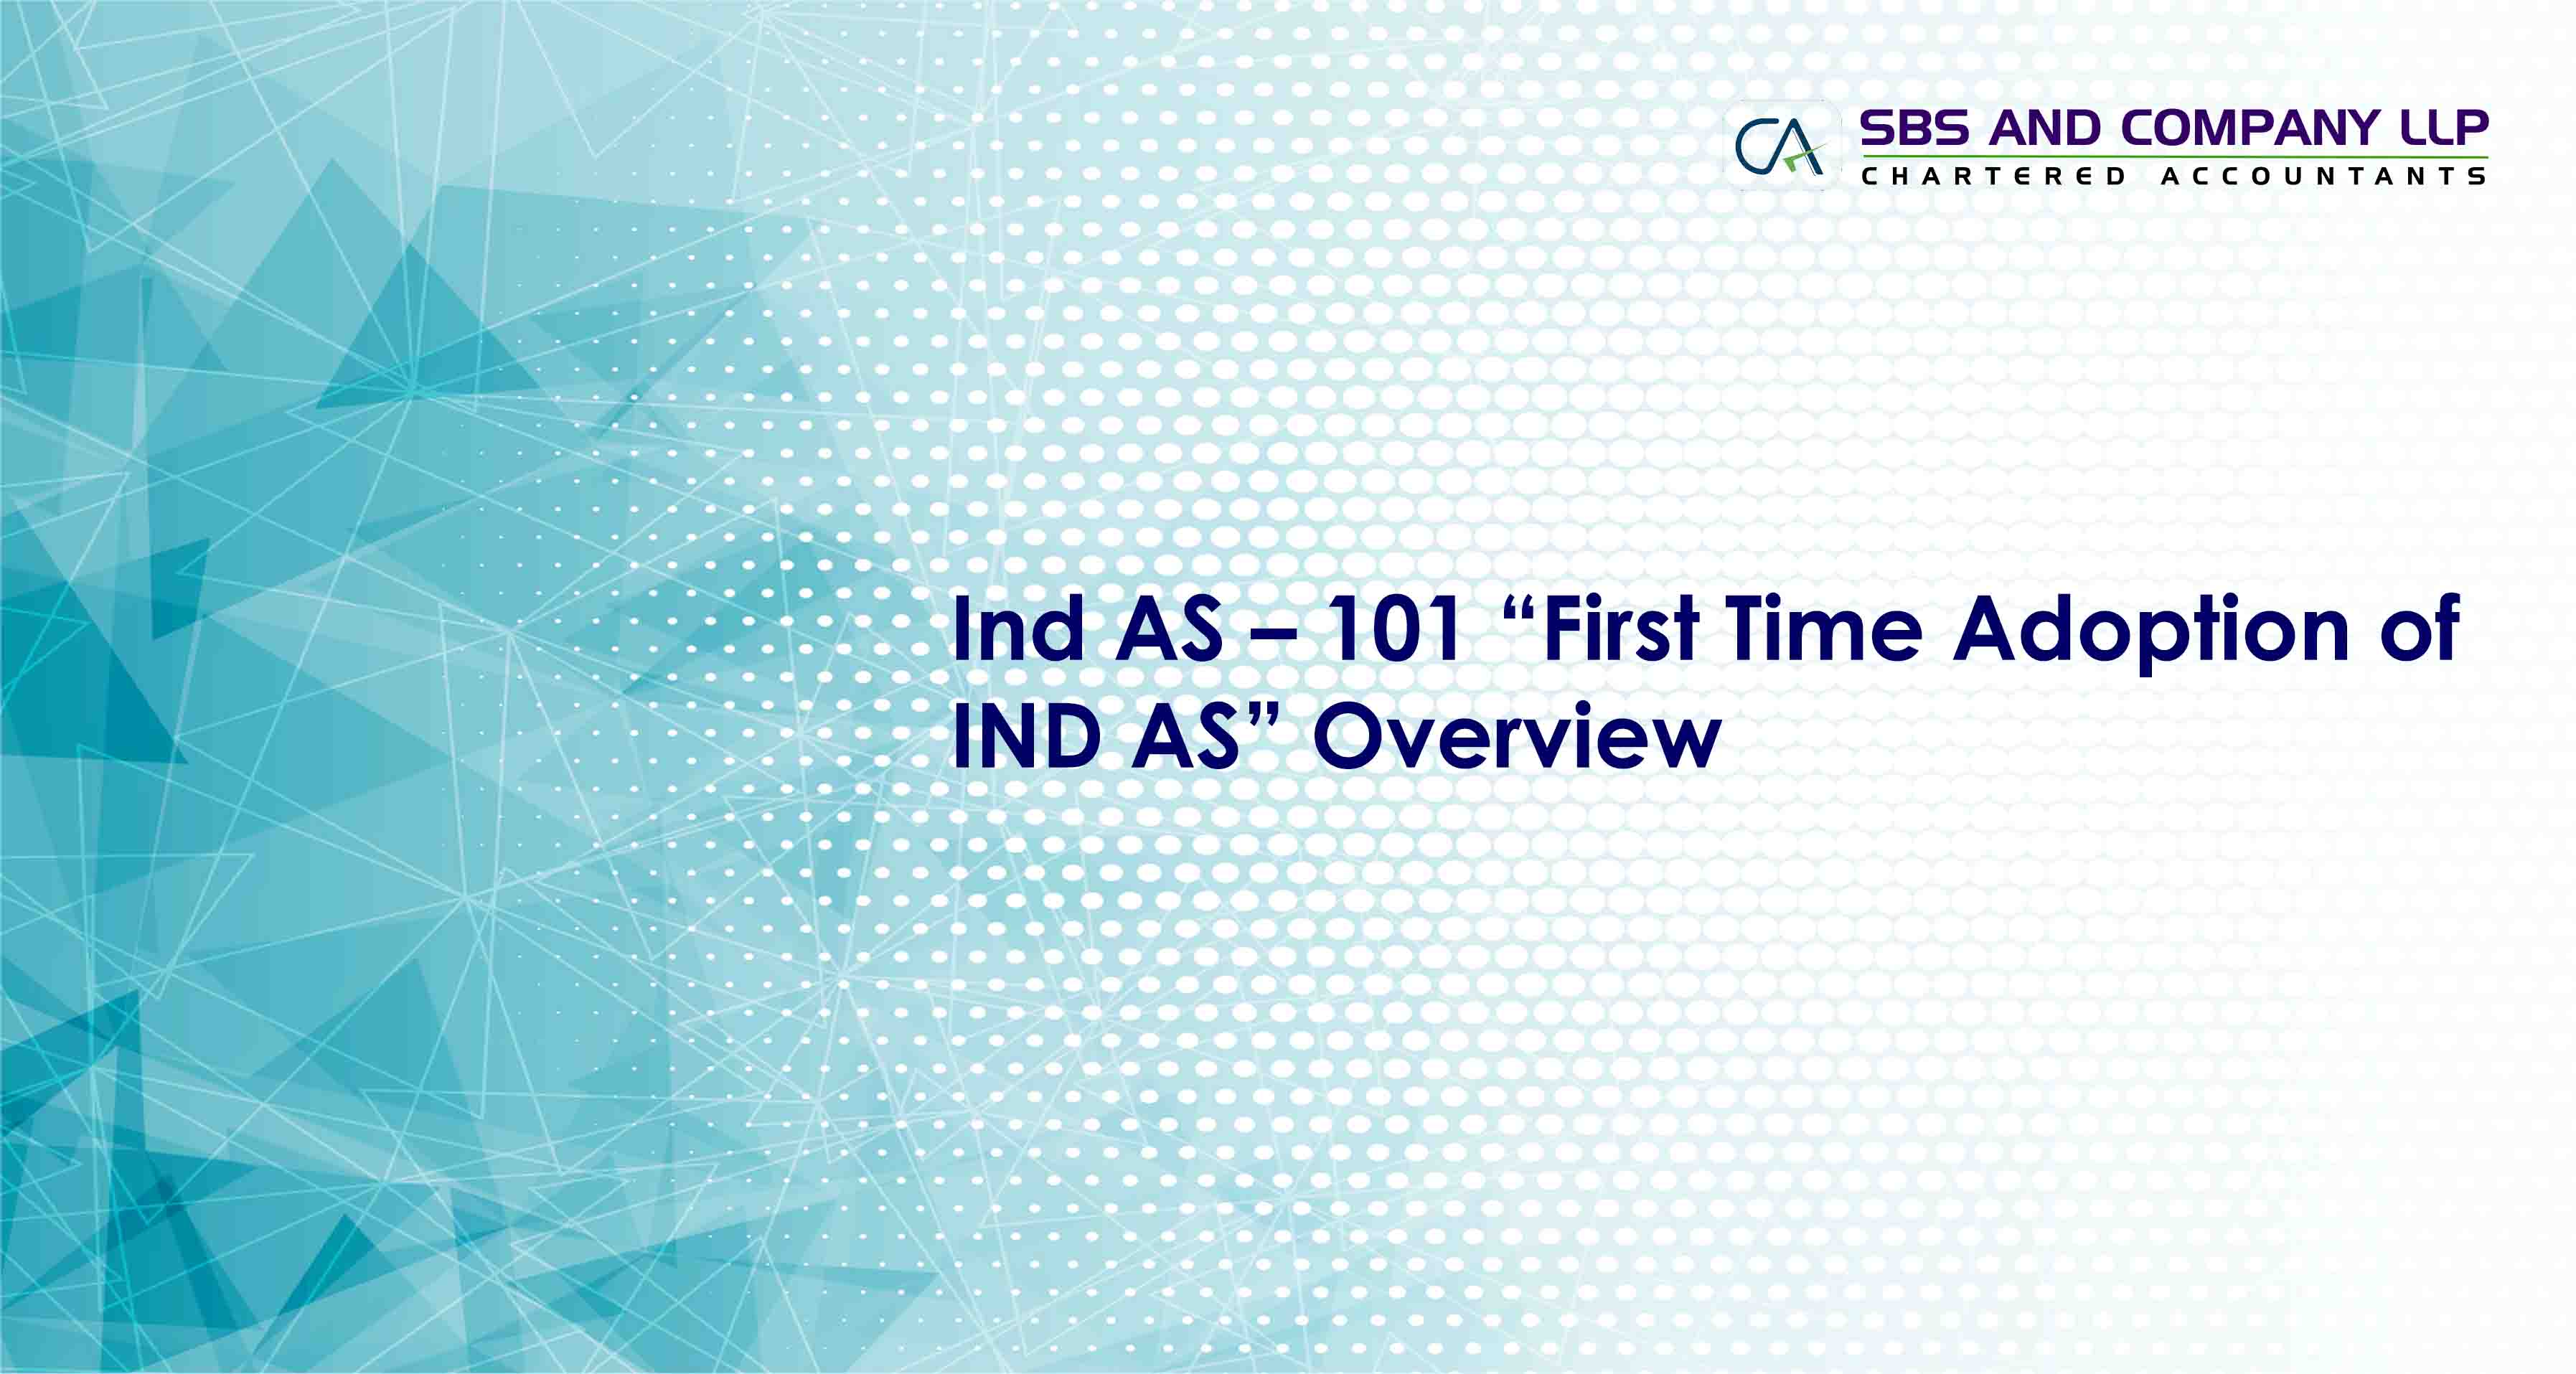 Ind AS – 101 “First Time Adoption of IND AS” Overview